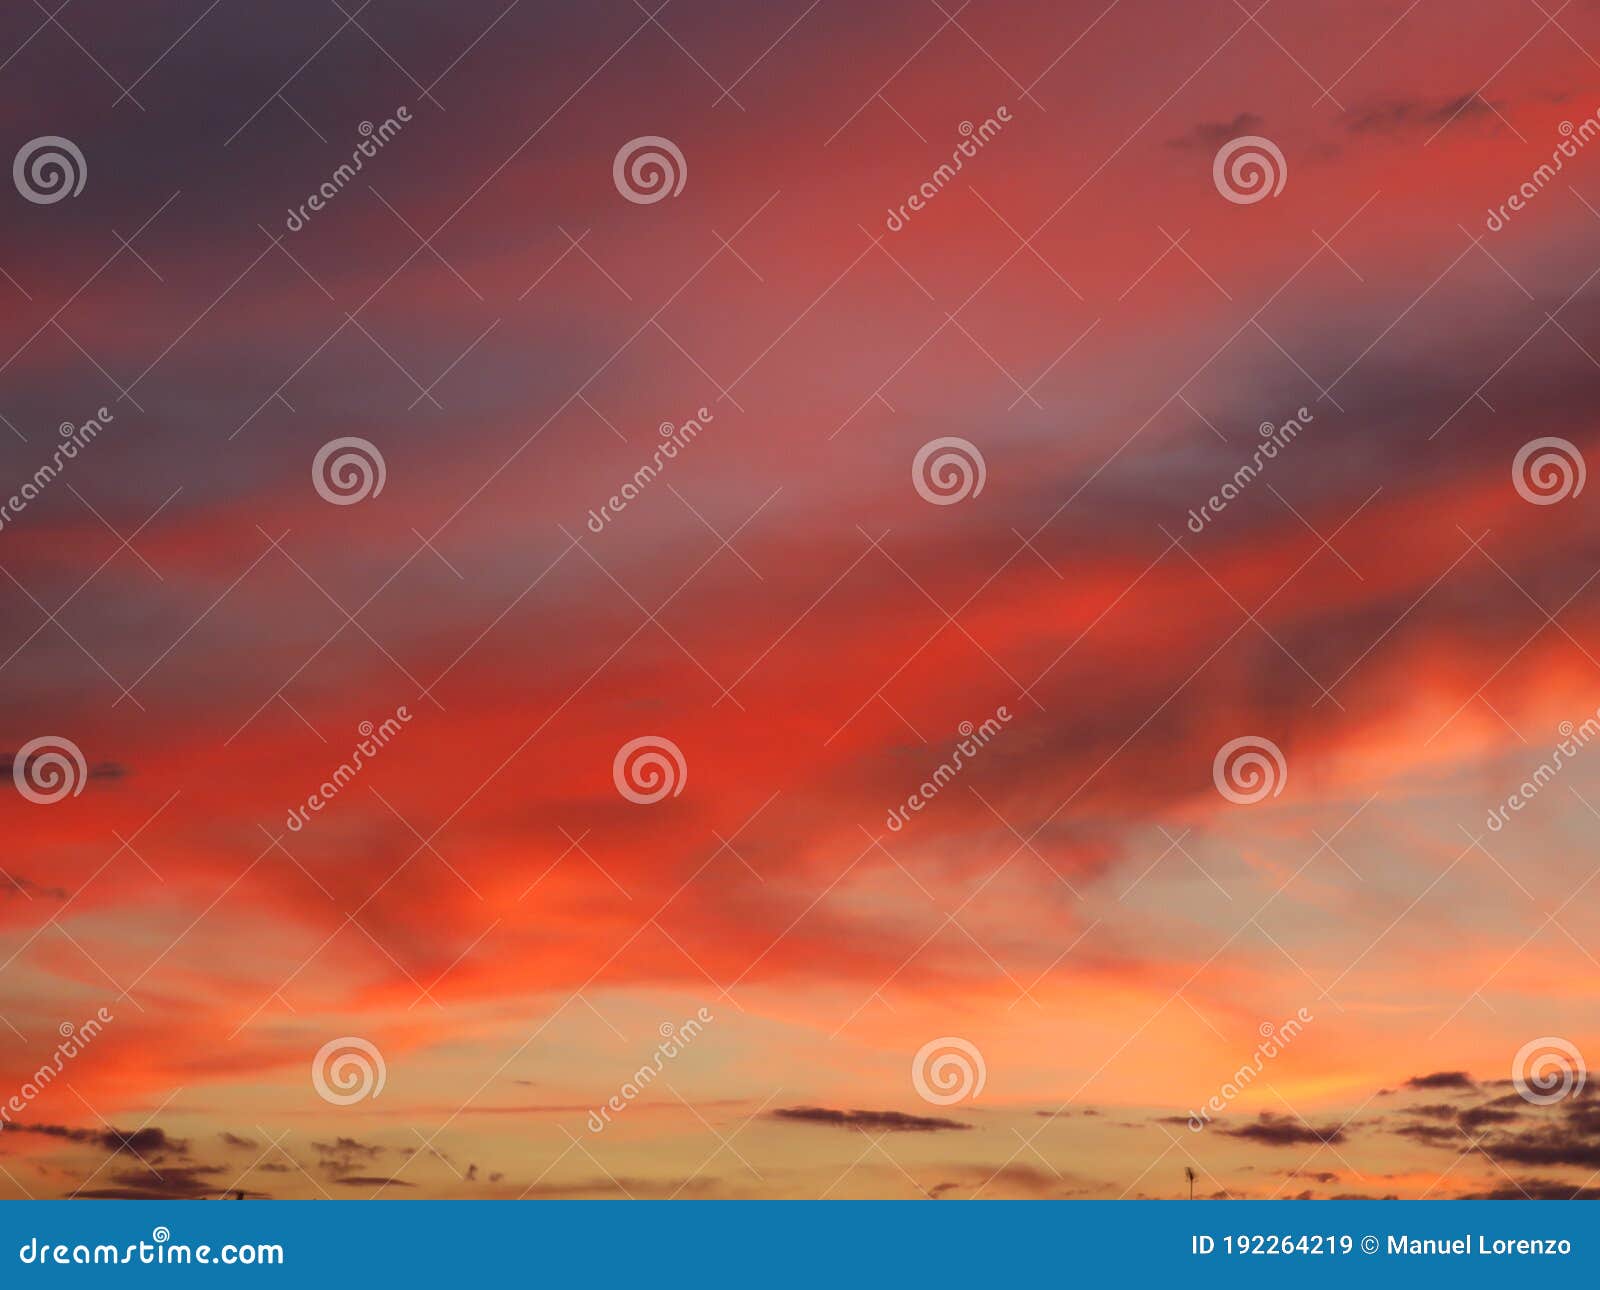 beautiful sunset clouds fire red dawn reflection